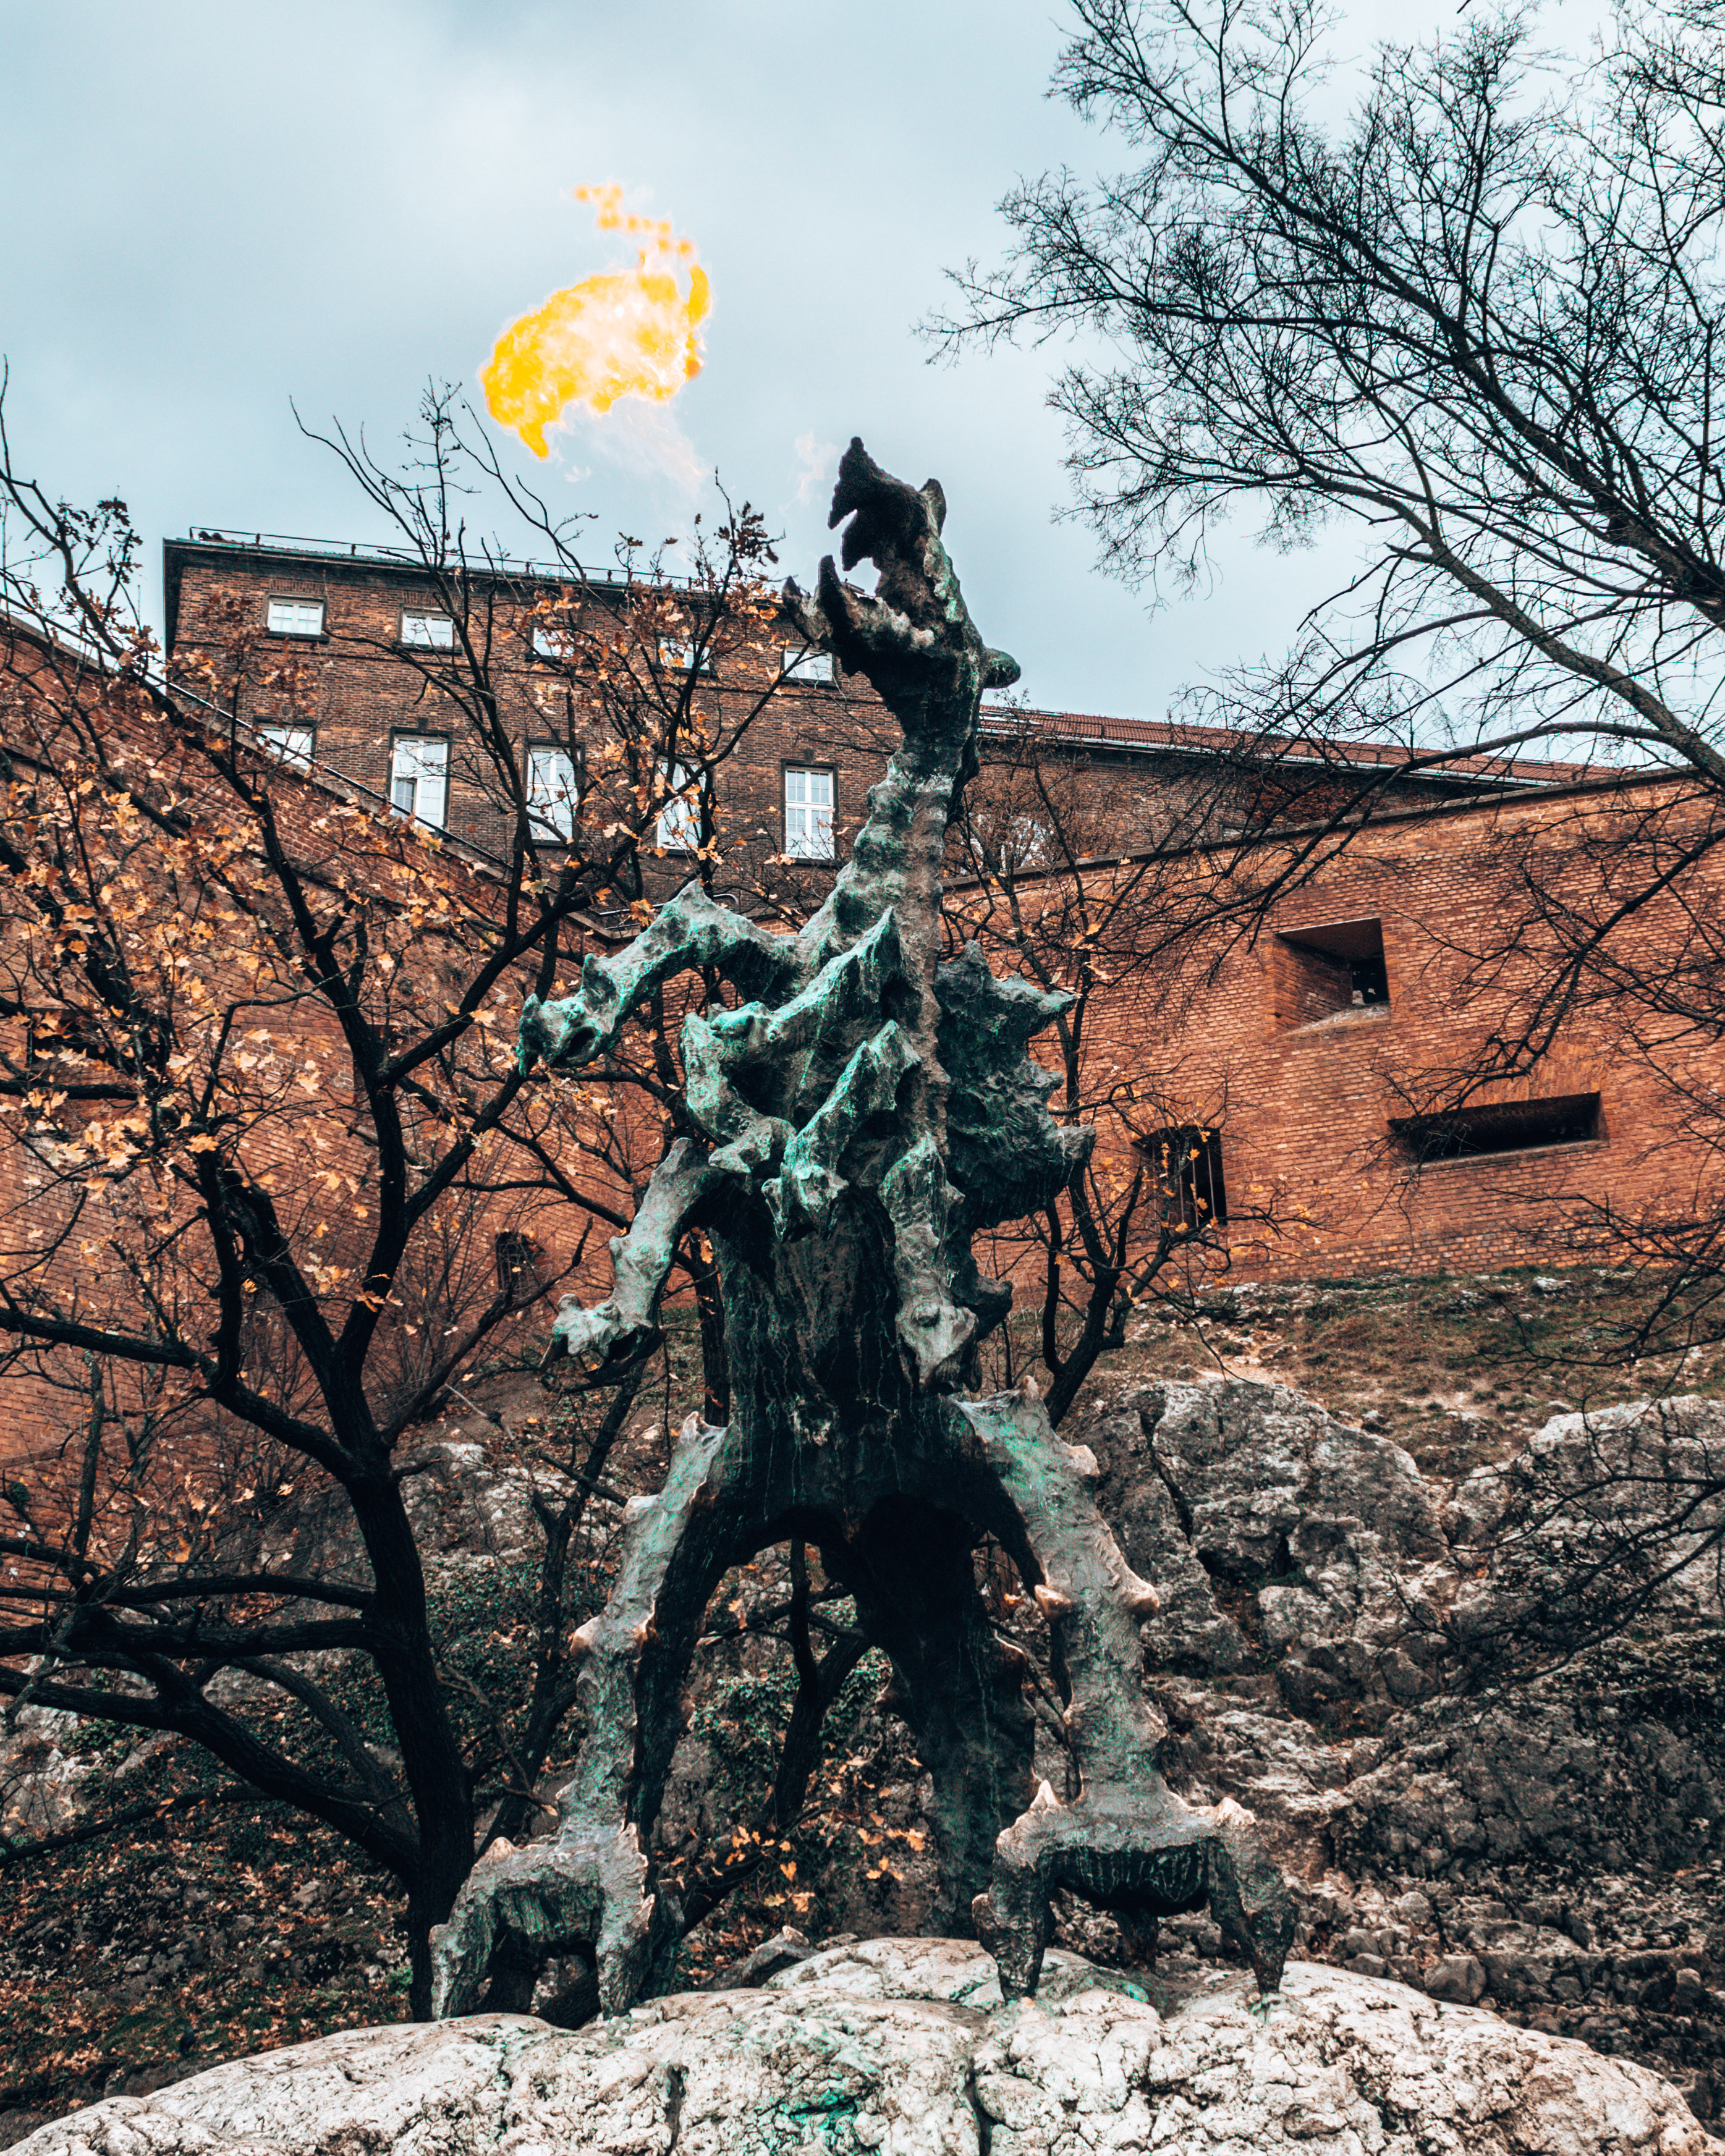 The fearsome 7 headed Dragon of the castle in Krakow, Poland